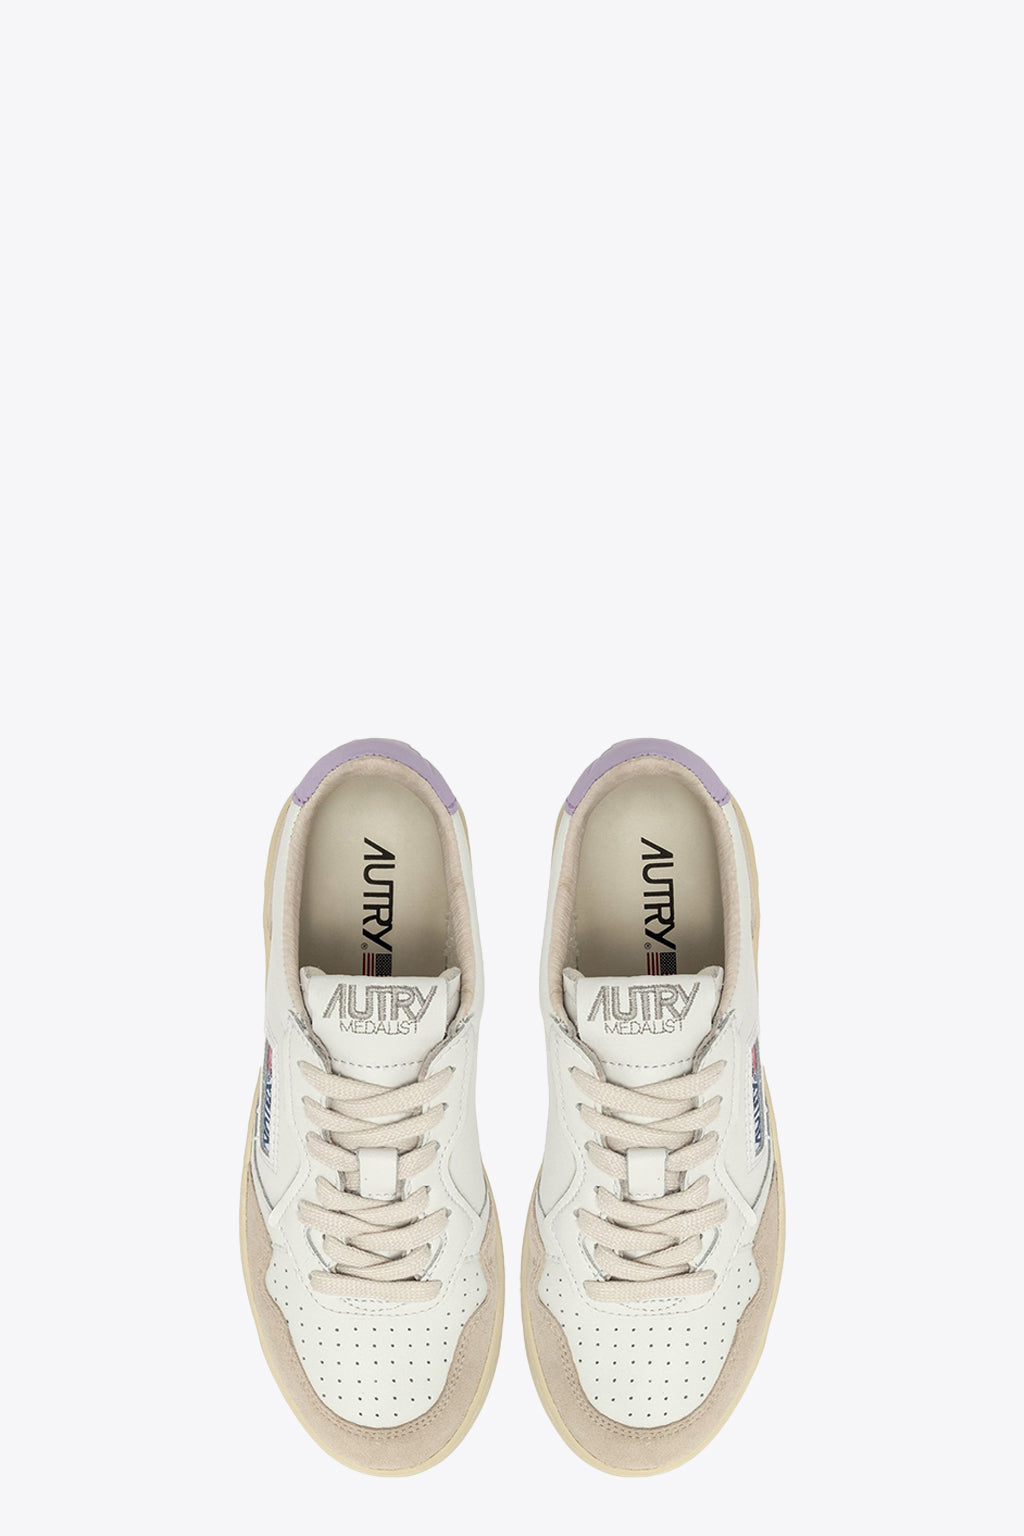 alt-image__White-leather-low-sneaker-with-lilac-tab---Medalist